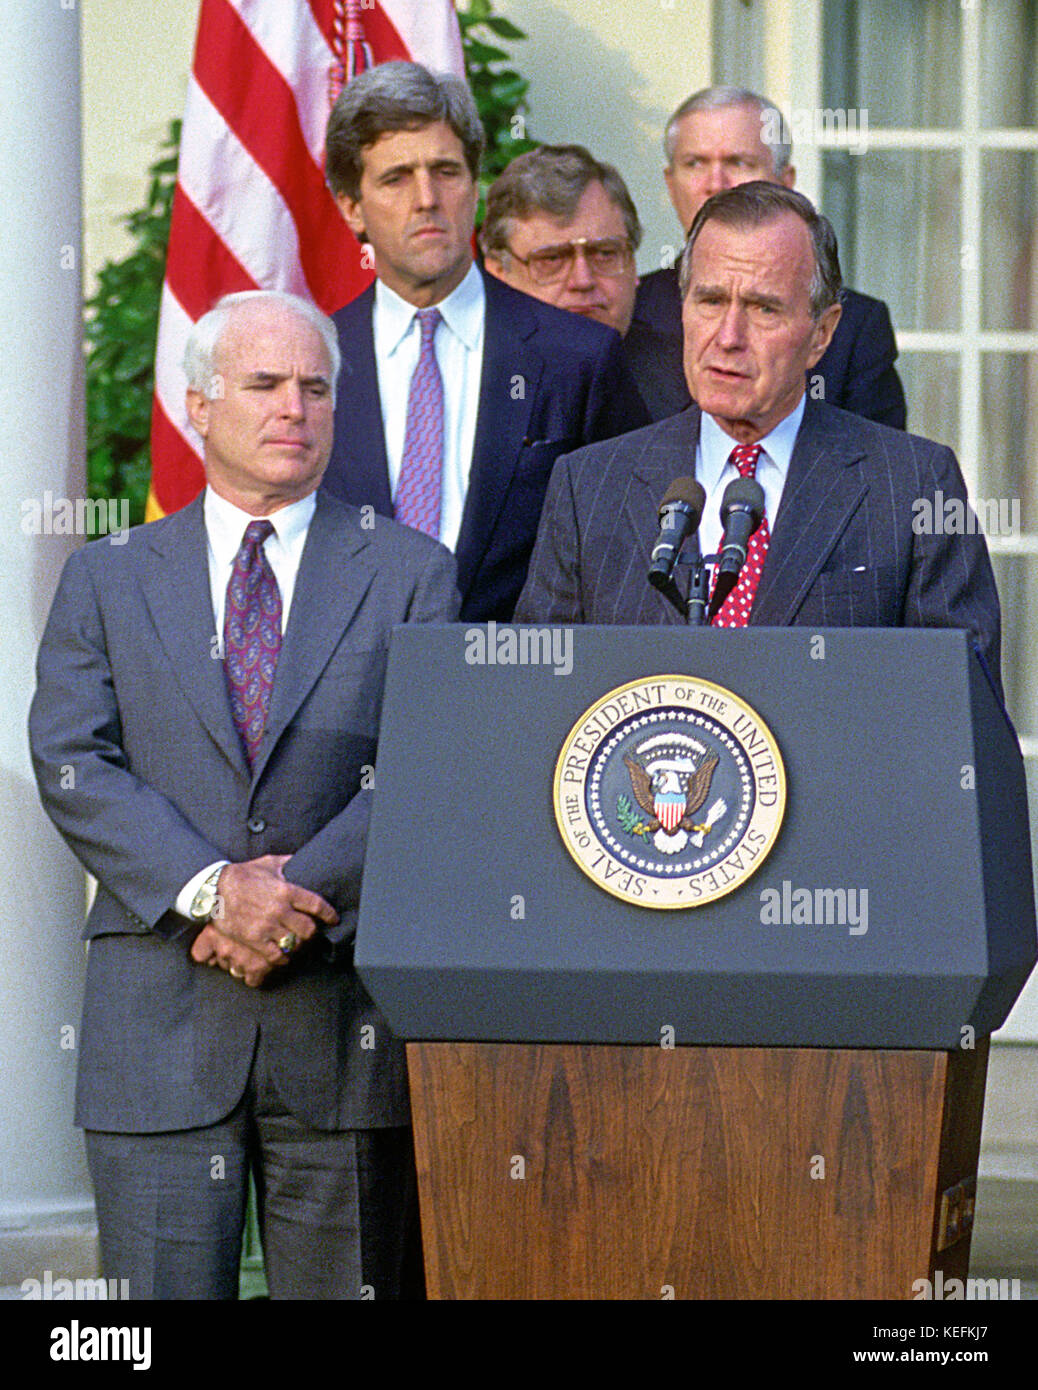 Washington, DC - (FILE) -- United States President George H.W. Bush announces the Government of Vietnam has agreed to make available all information including photographs, artifacts, and military documents on United States prisoners of war (POWs) and those missing in action (MIAs) in the Rose Garden of the White House on Friday, October 23, 1992.  Pictured from left to right: United States Senator John McCain (Republican of Arizona); United States Senator John F. Kerry (Democrat of Massachusetts); United States Secretary of State Lawrence Eagleburger; Director of Central Intelligence Robert M. Stock Photo